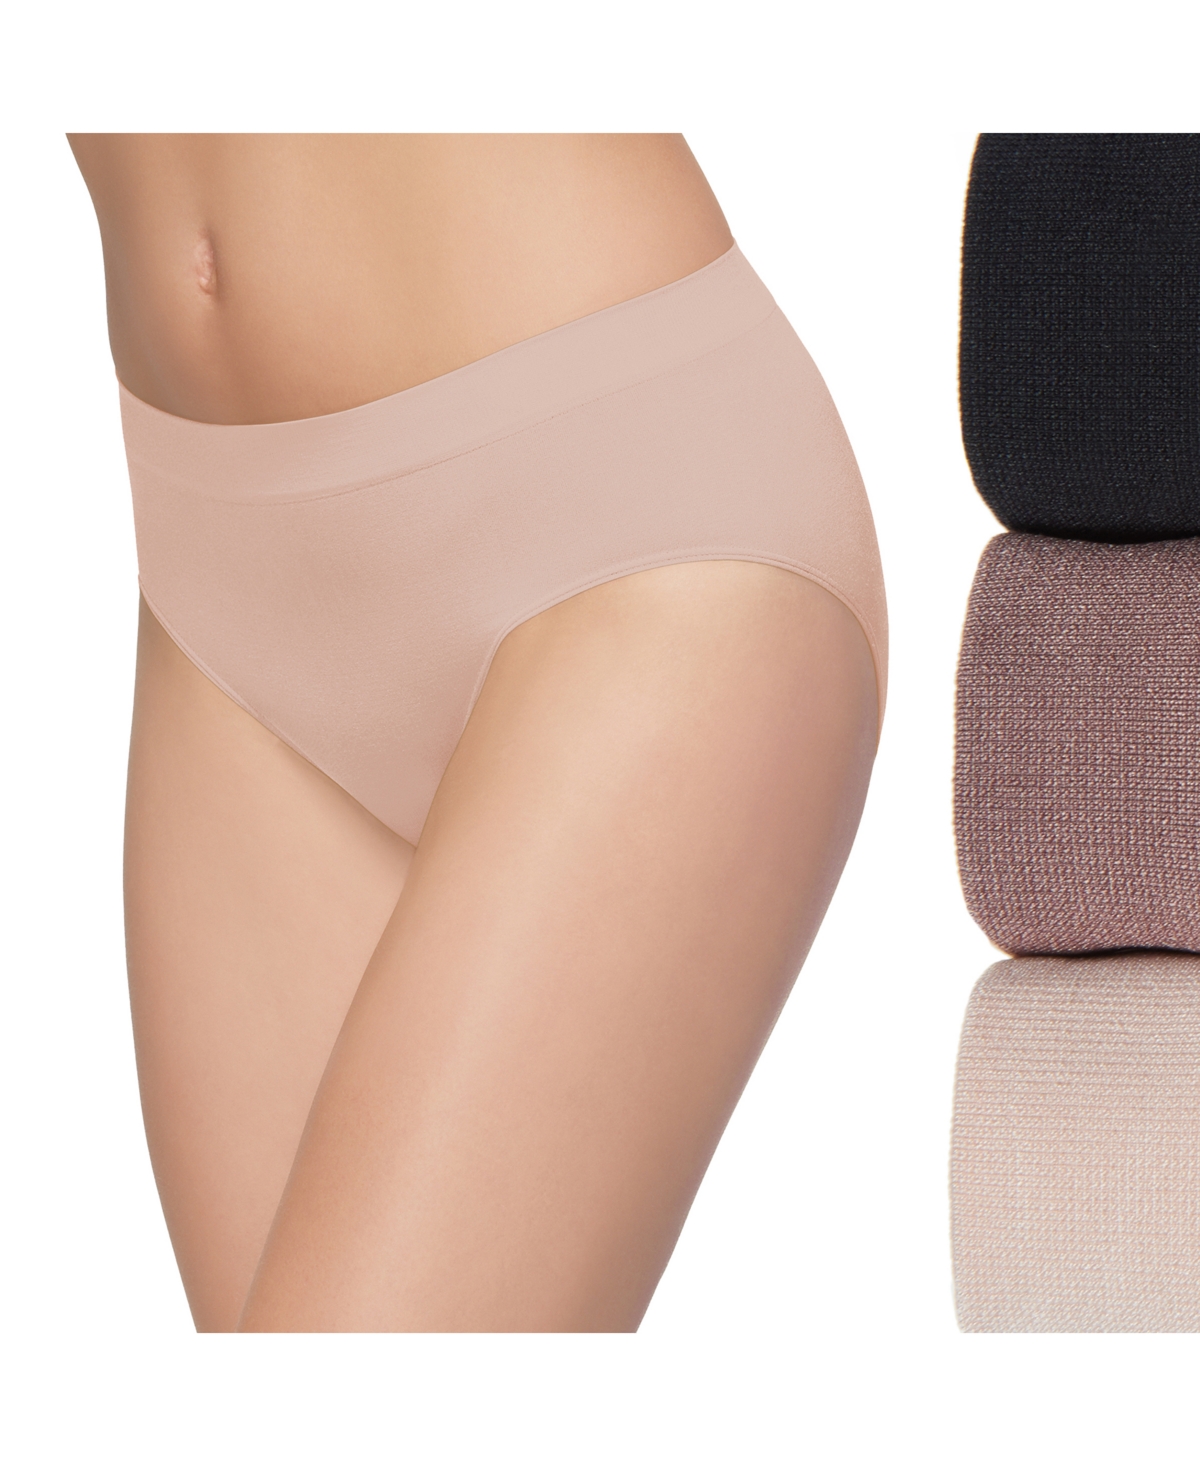 B-Smooth Seamless Brief 3-Pack 870175 - Rose Dust, Deep Taupe, Black